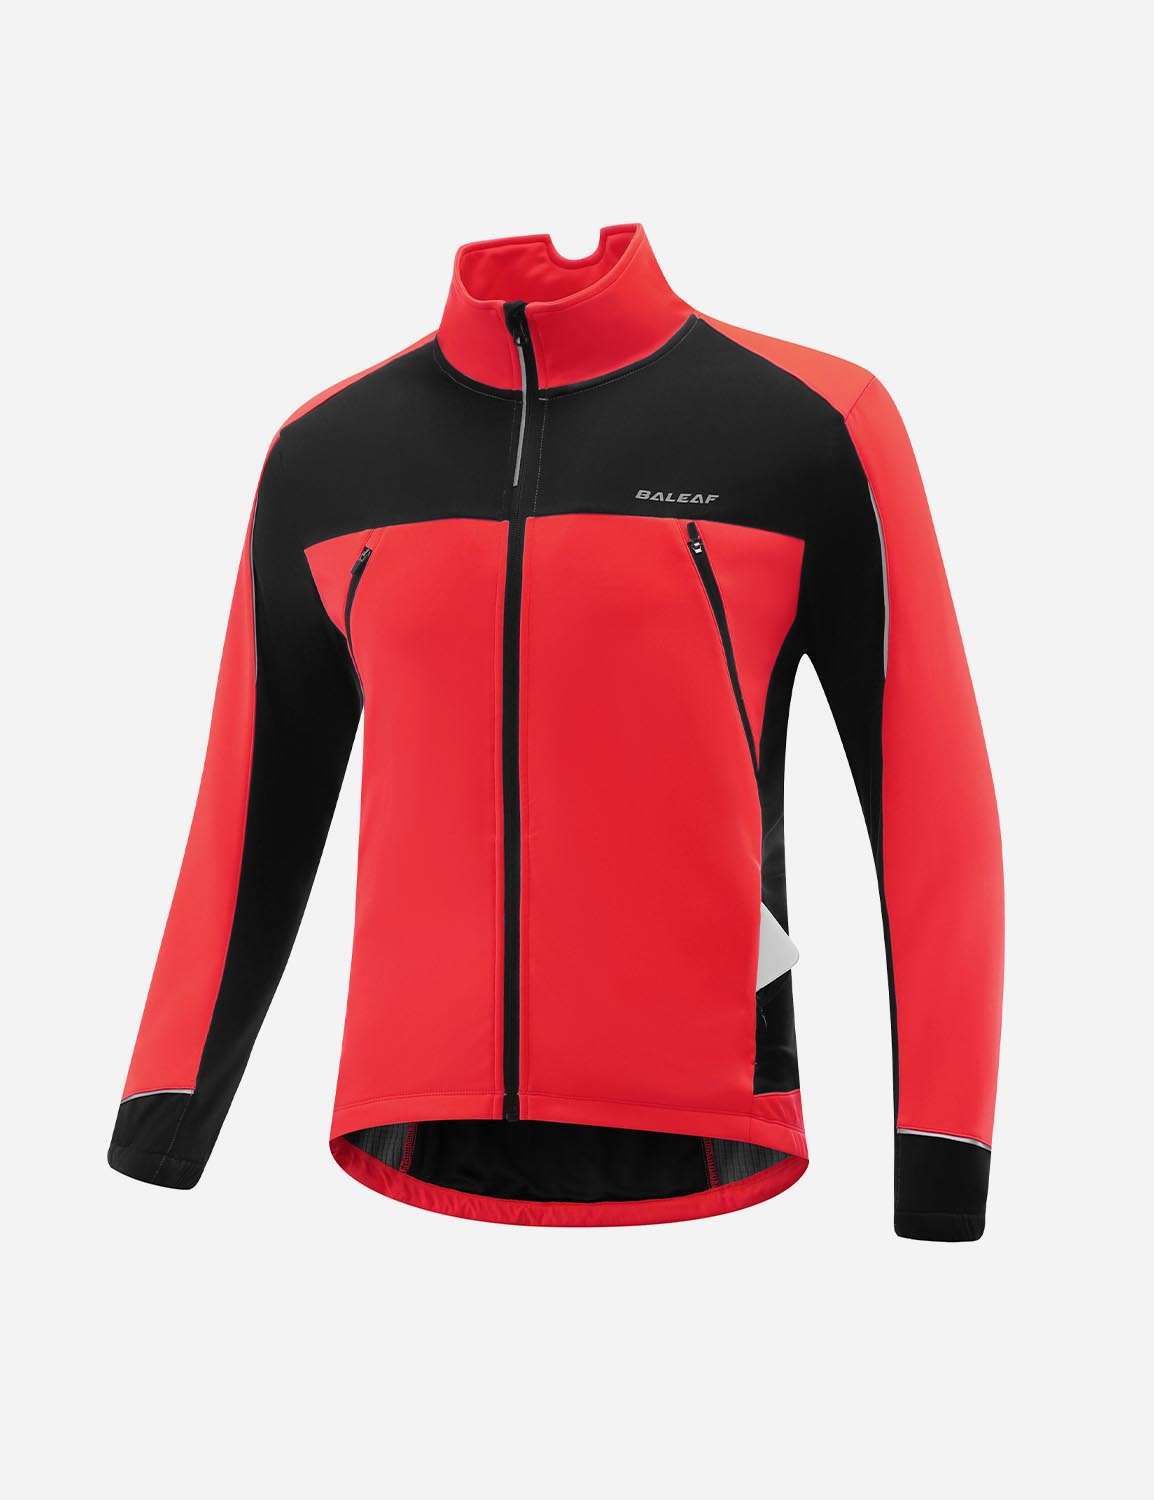 Baleaf Men's Windproof Thermal Softshell Cycling Jacket cai044 Chinese Red Front